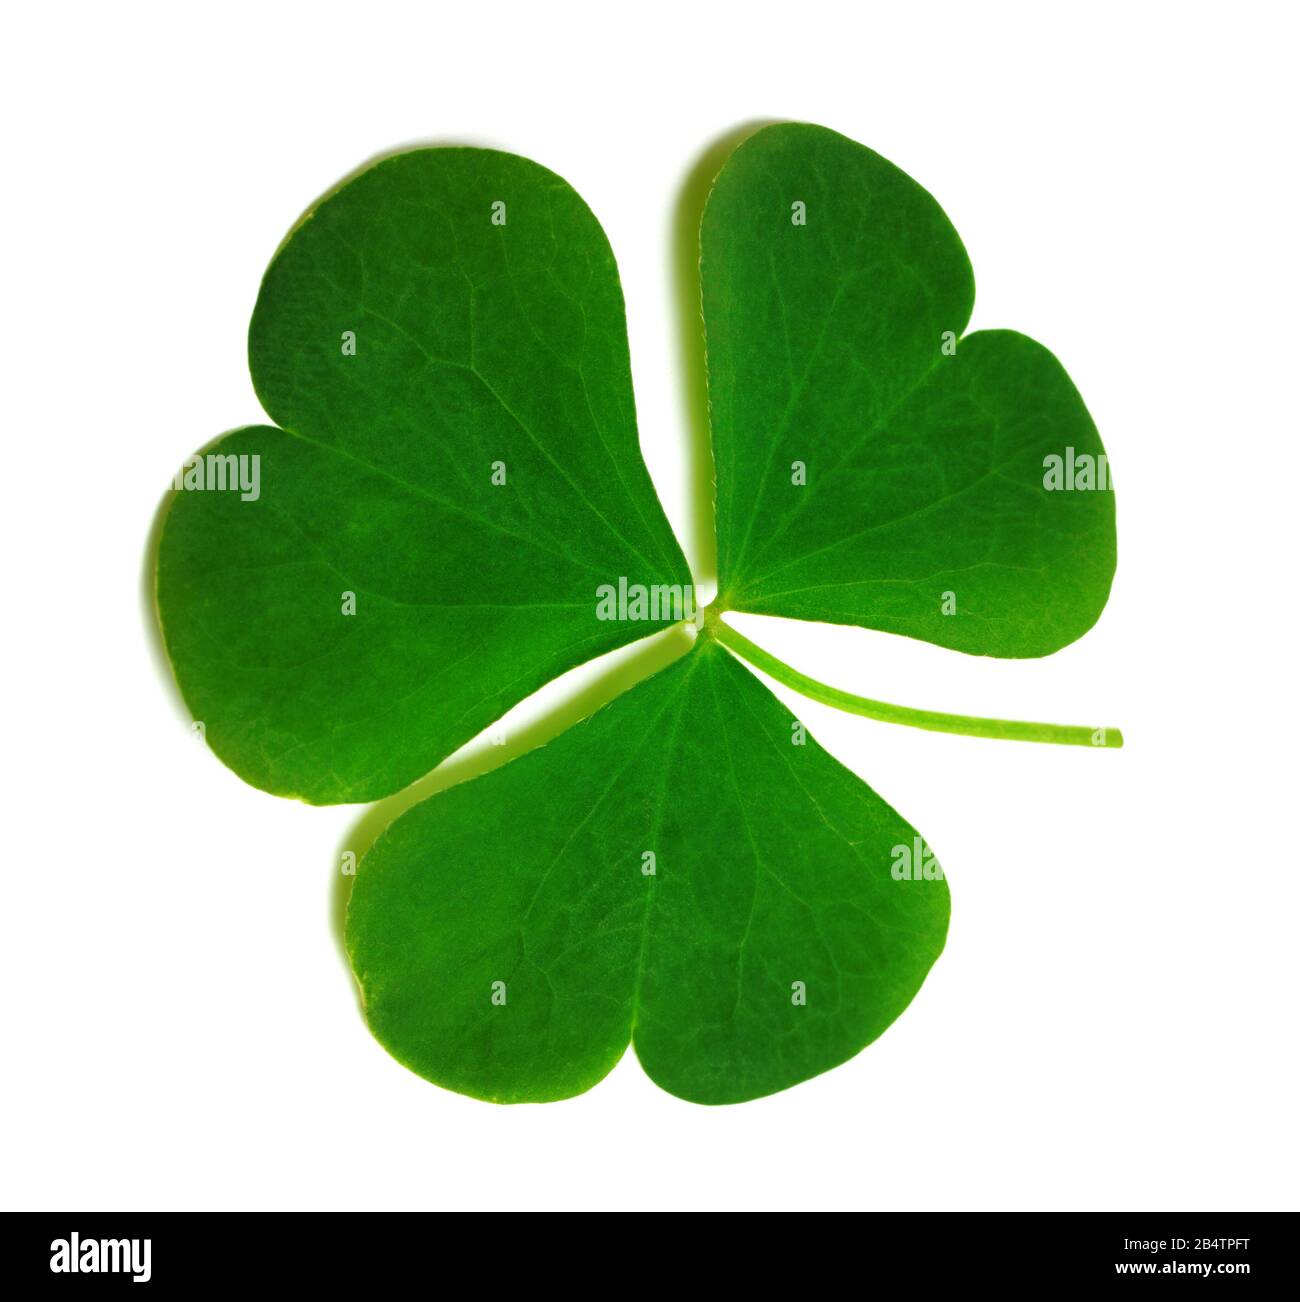 Spring clover leaf isolated on white background. Green three-leaved shamrock - symbol of Saint Patricks Day. Close-up view. Stock Photo